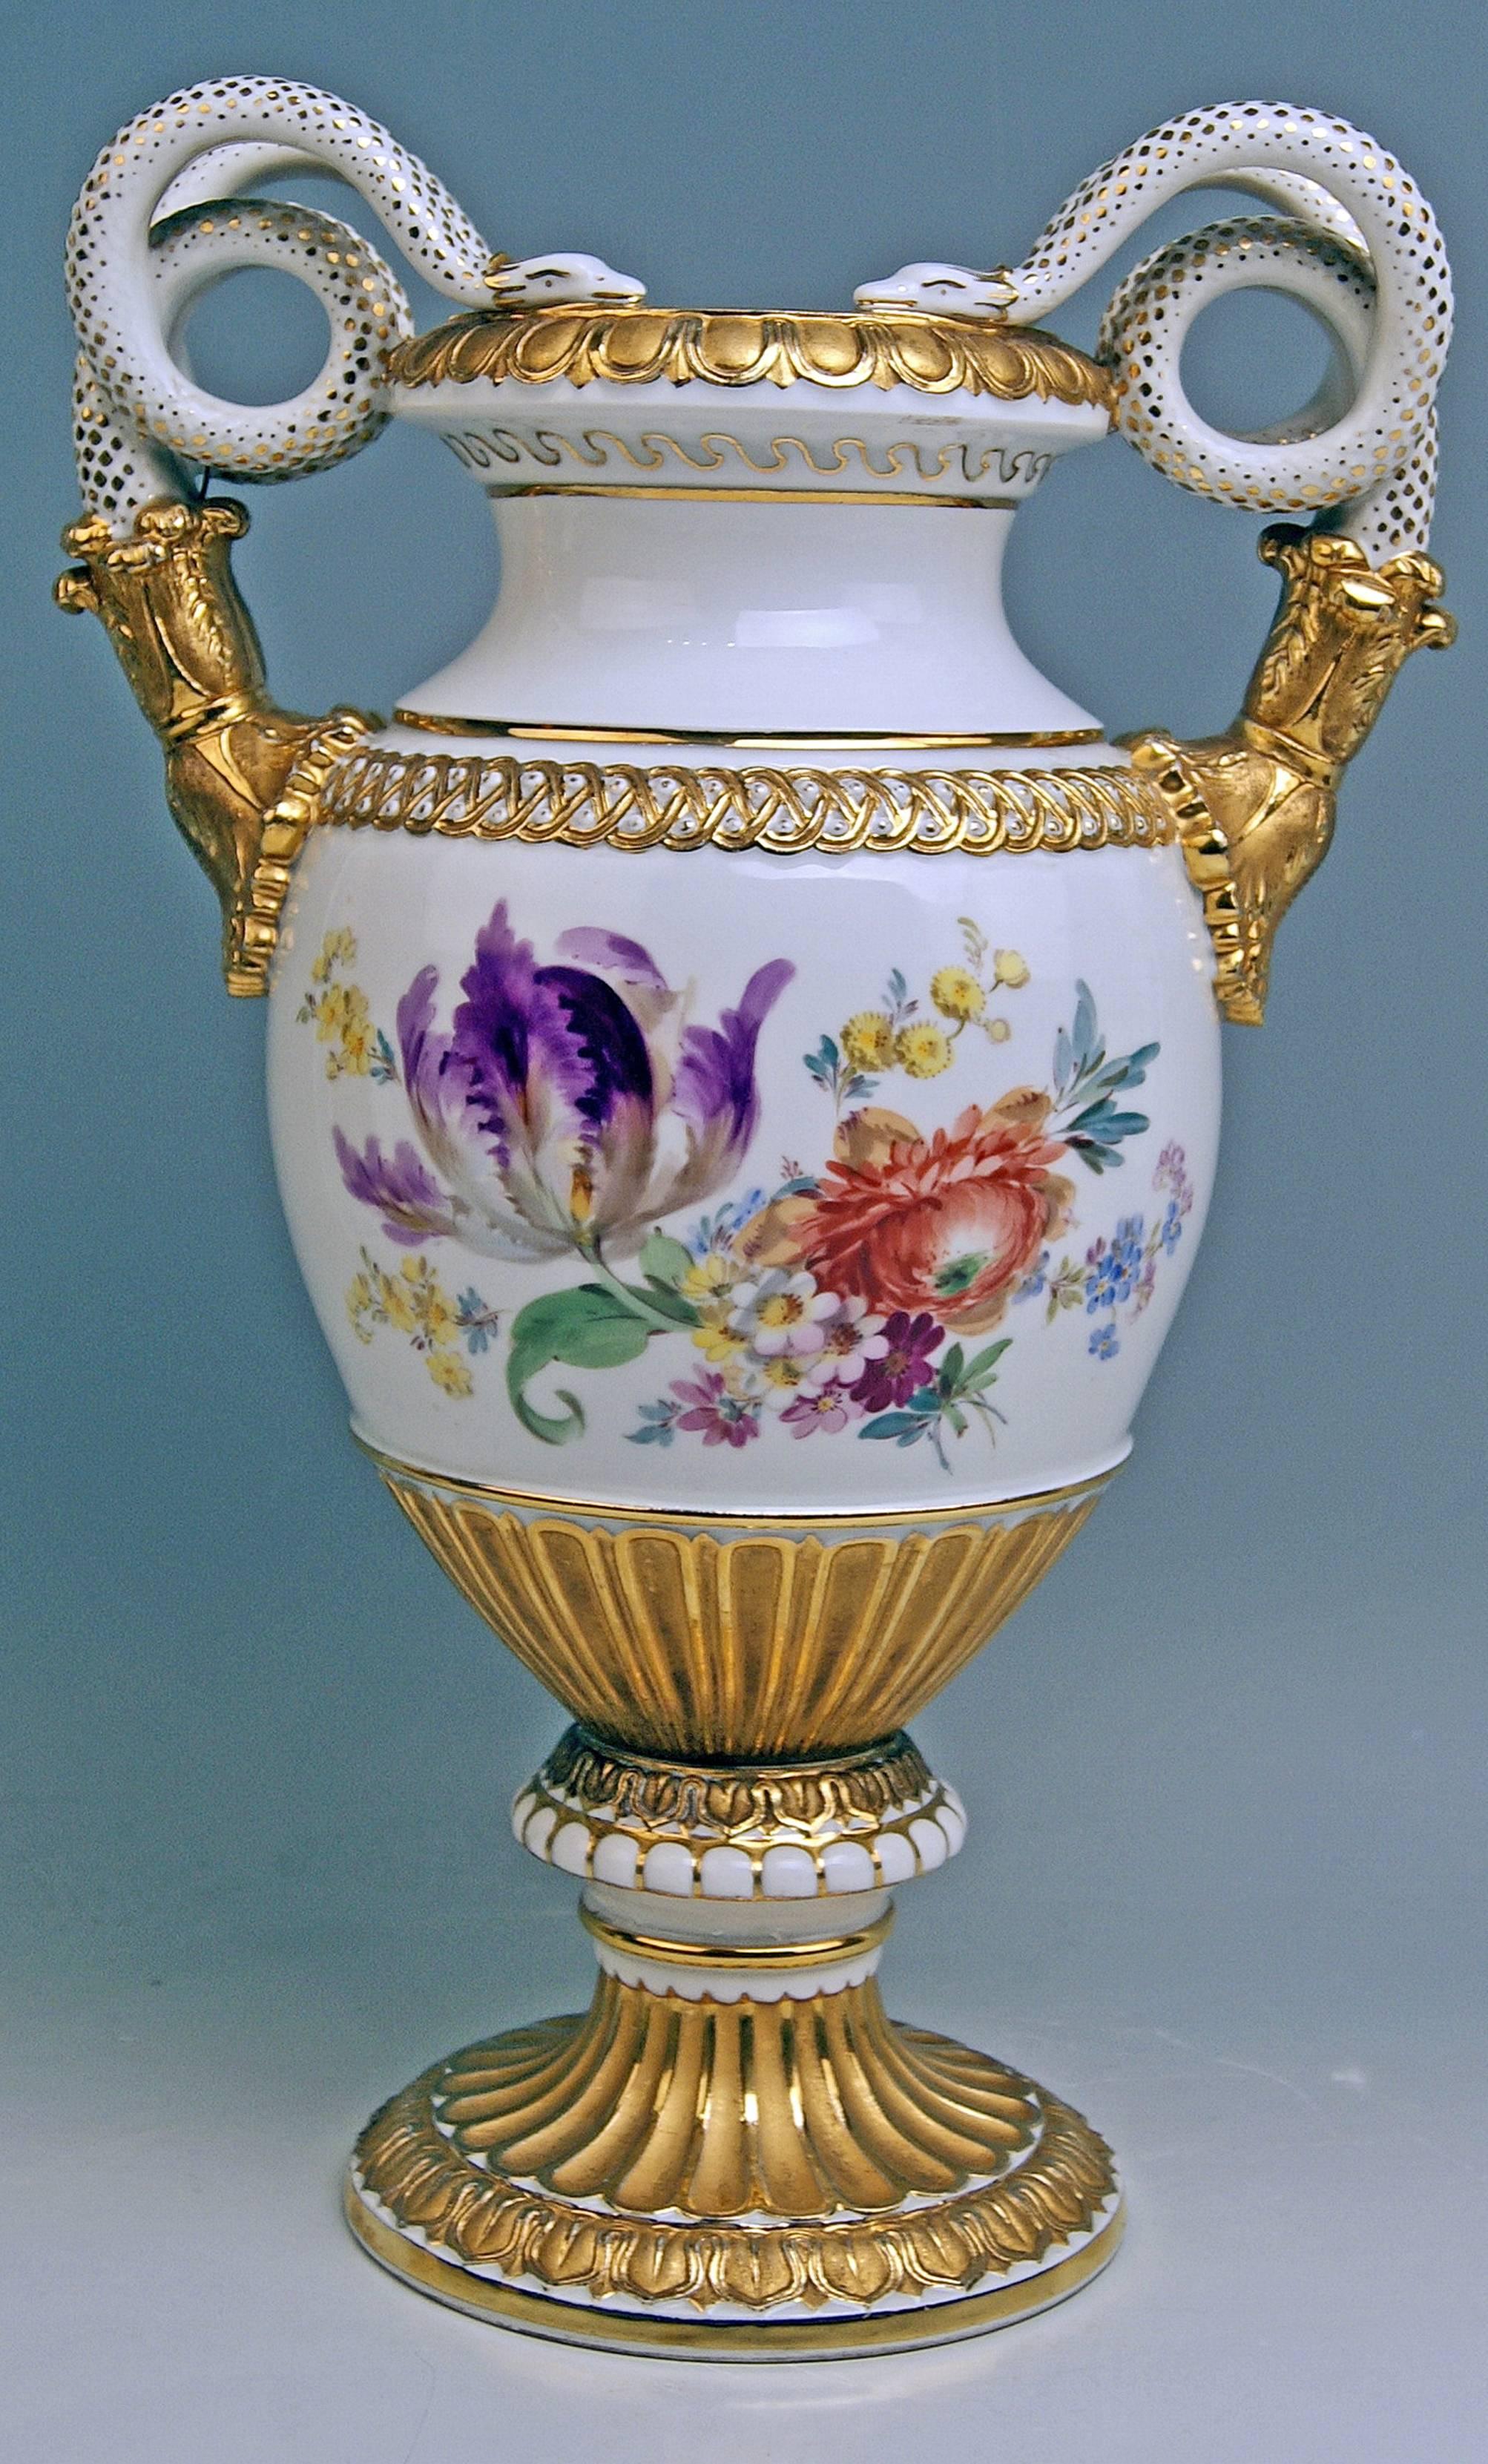 Meissen nicest snake handles vase, designed by Leuteritz
Please note: Abundantly painted with flowers!

Manufactory: Meissen 
Dating: made during 19th century (circa 1870)
Hallmarked: Meissen Mark with Pommels on Hilts (19th century)
First